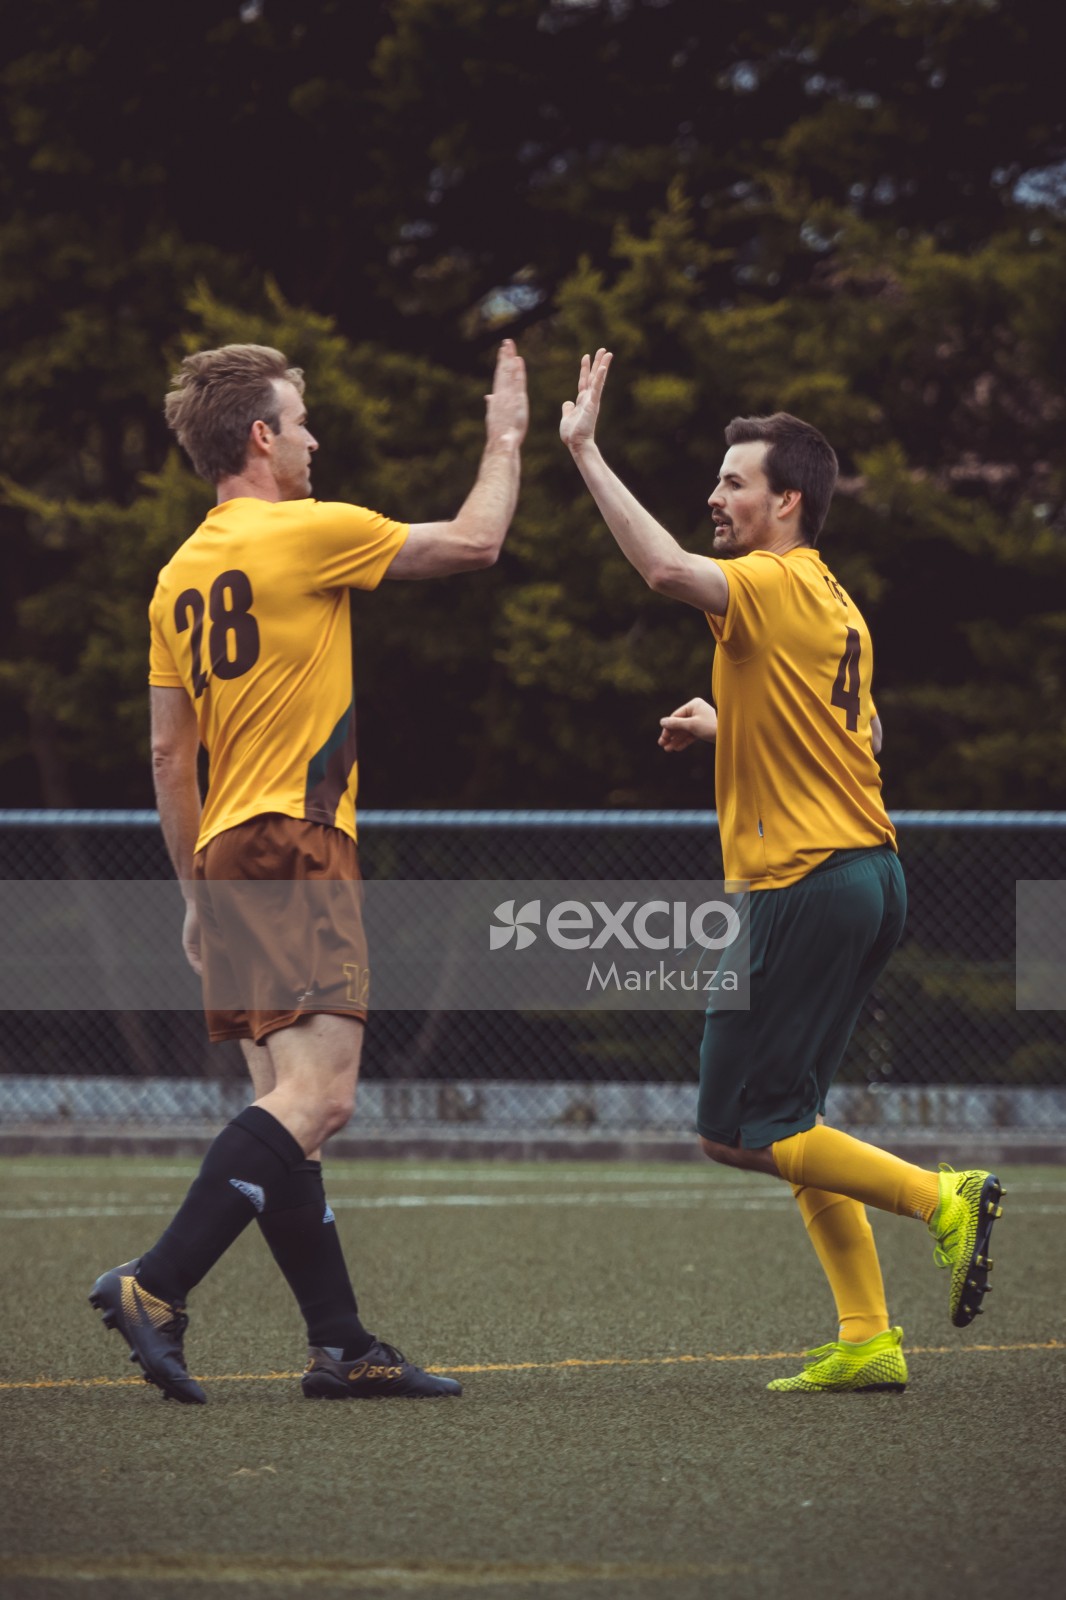 Teammates in yellow shirts high fiving - Sports Zone sunday league